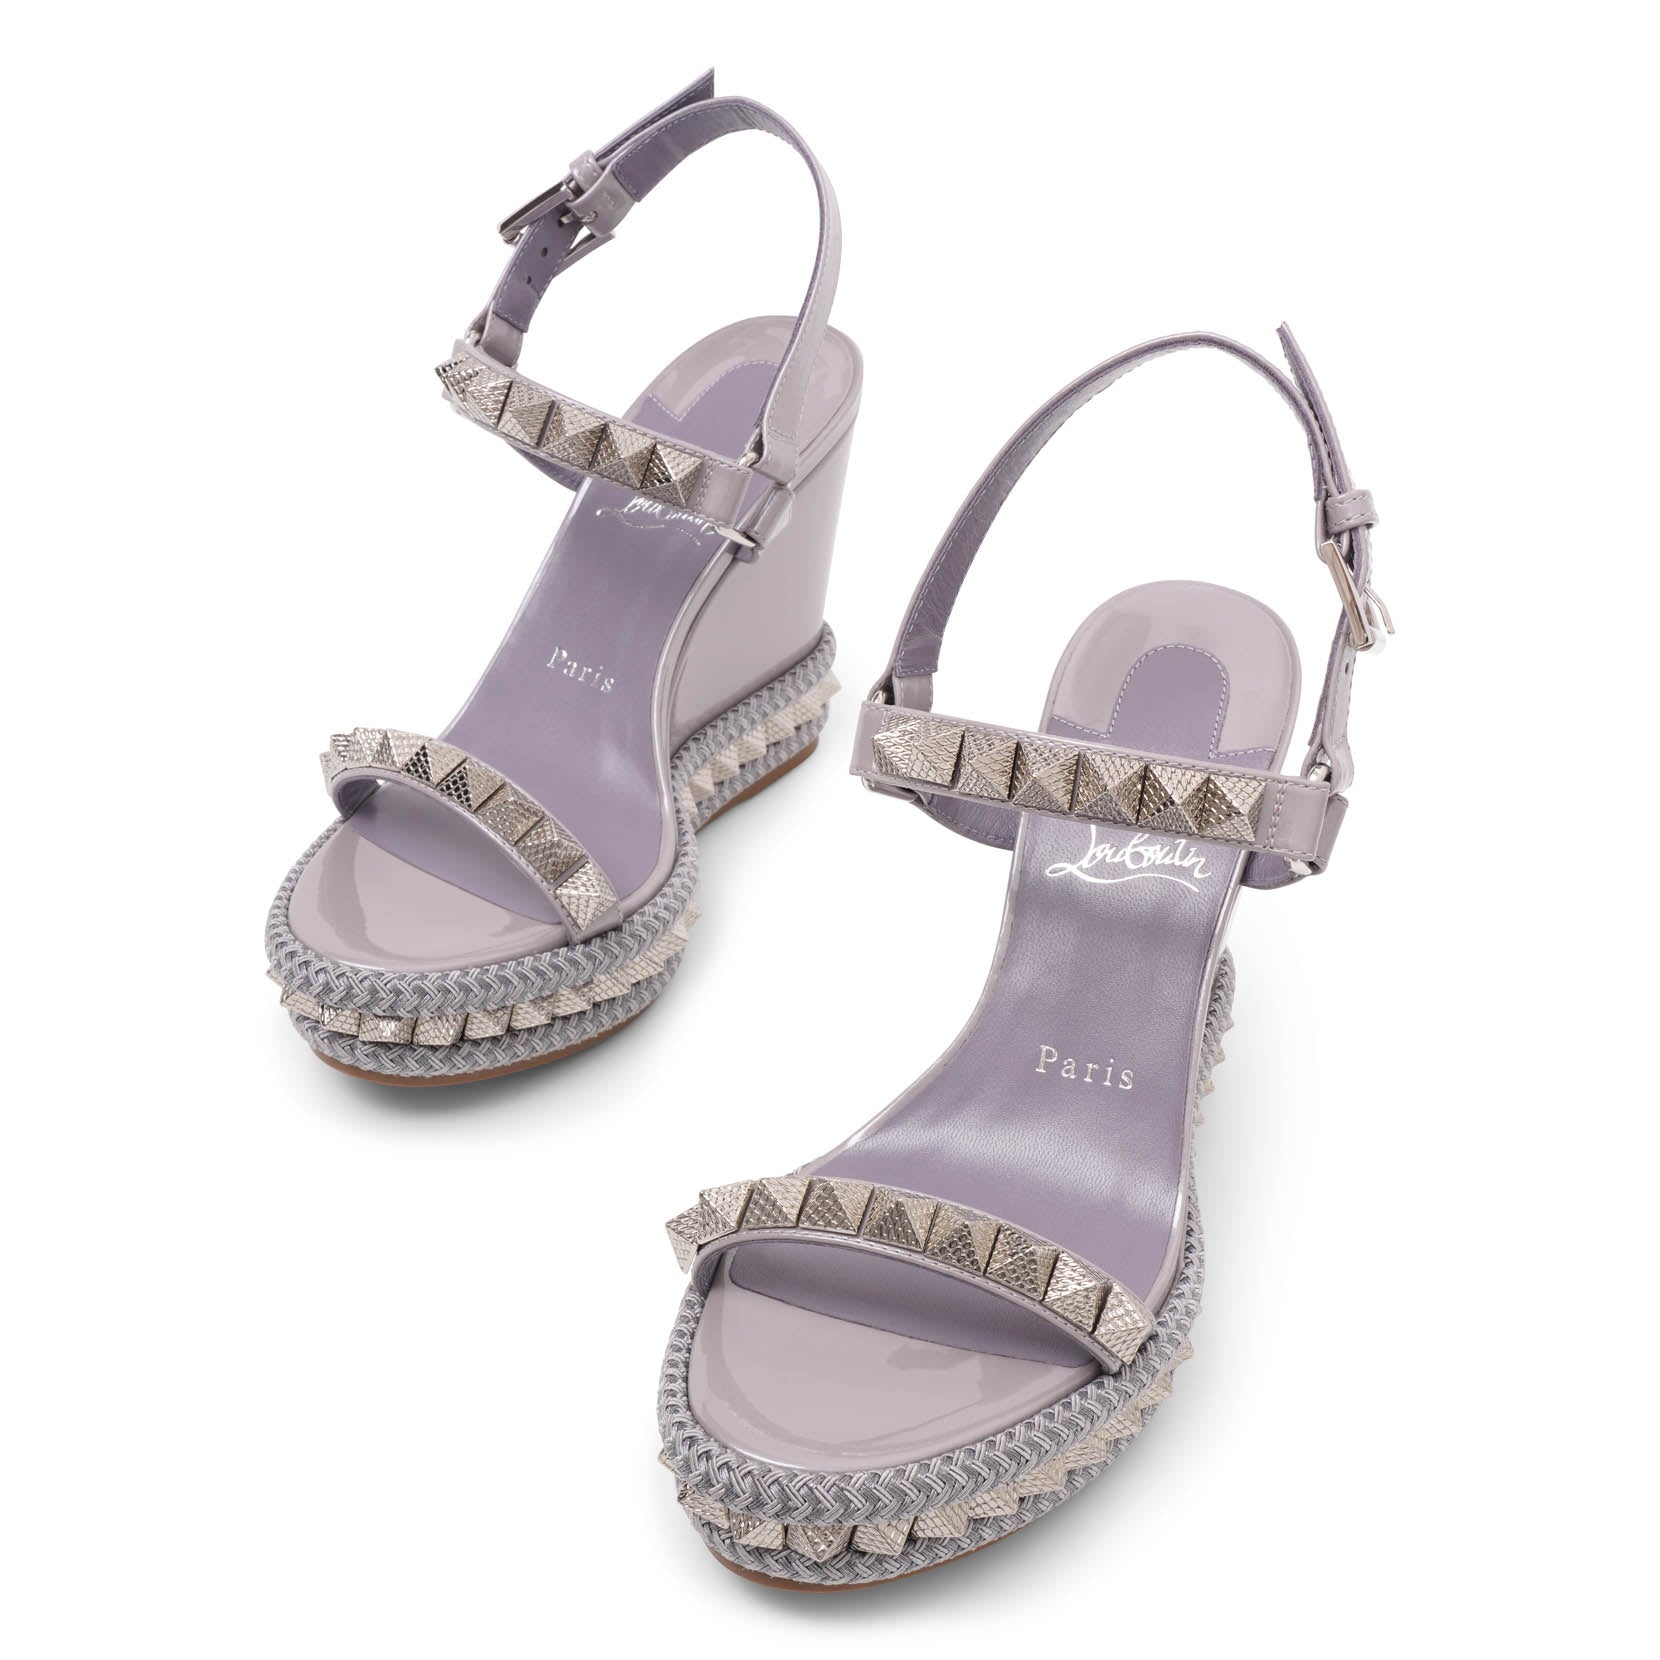 Pyraclou 110 lilac wedges